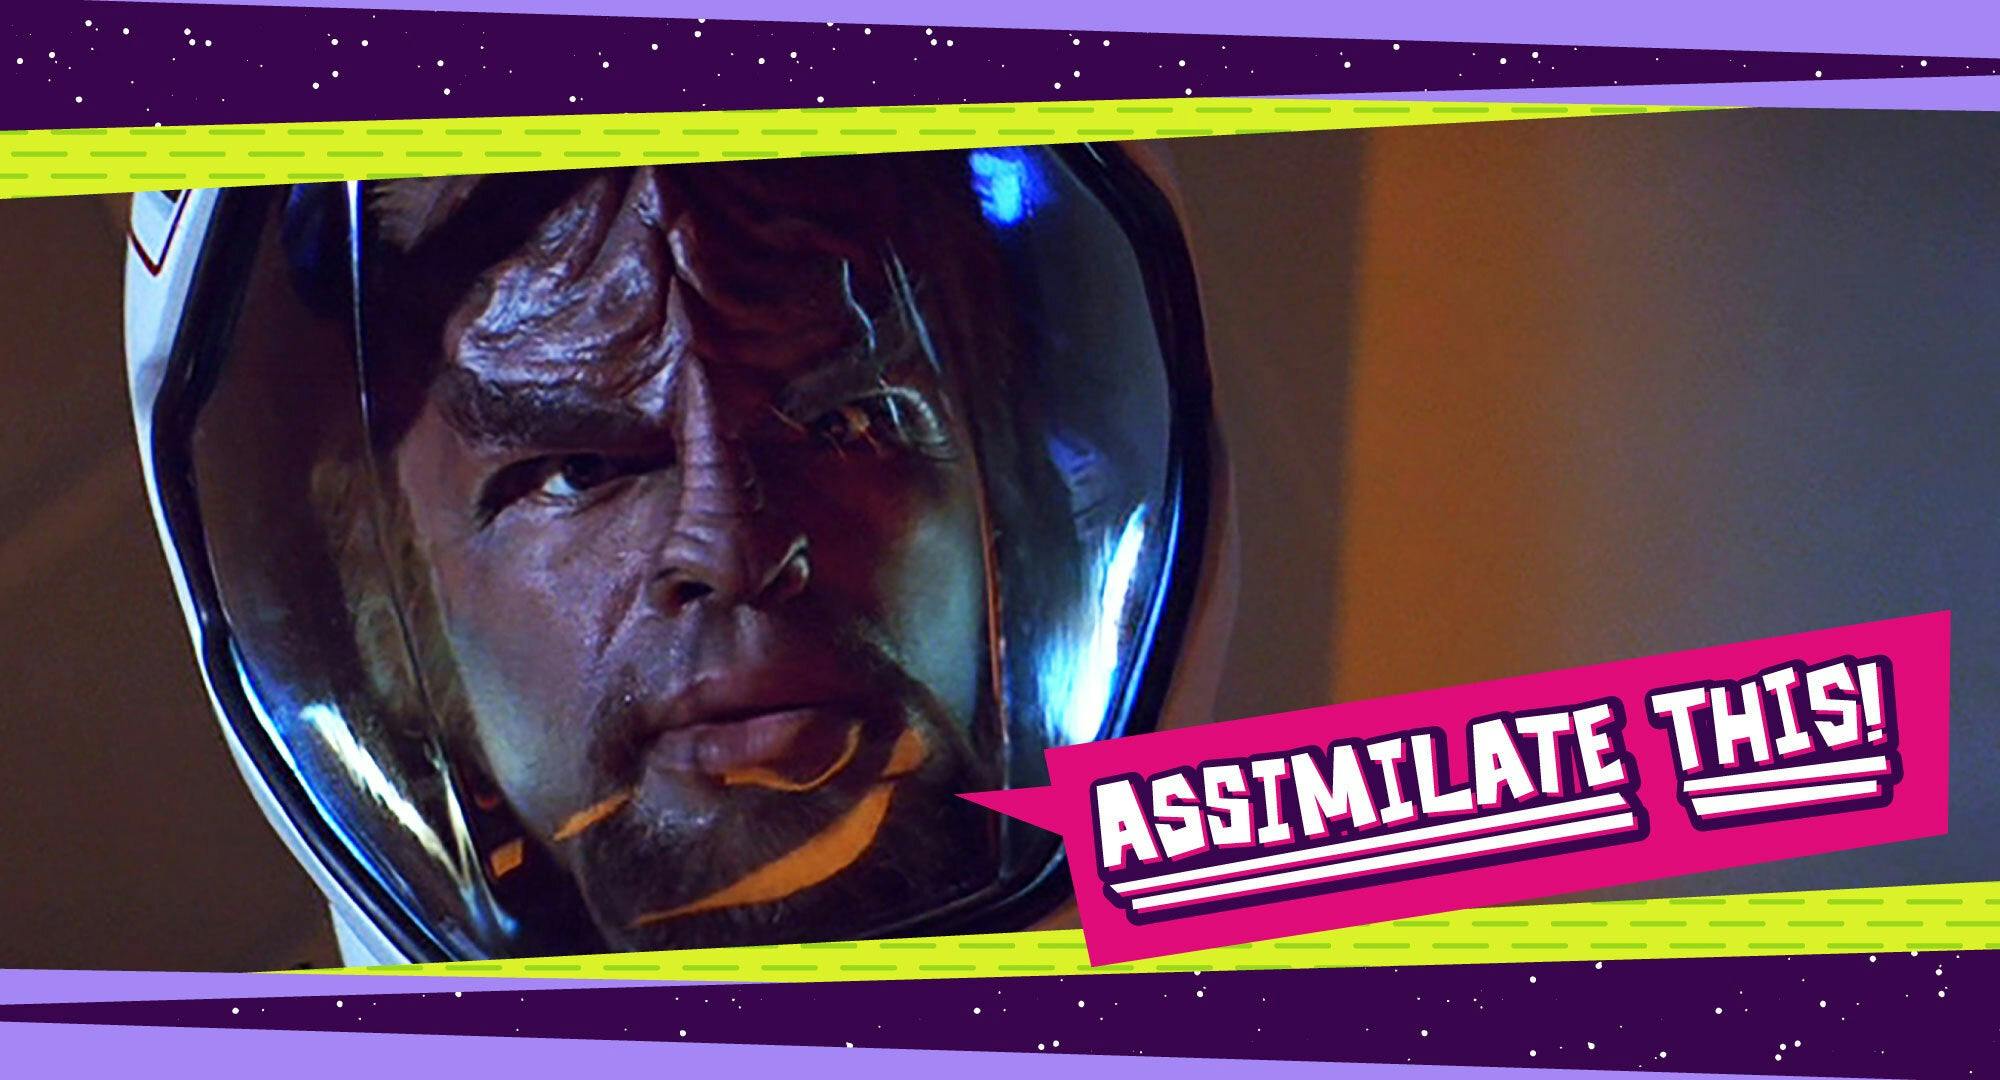 Illustrated banner of Worf from Star Trek: First Contact in a space suit with text overlay 'Assimilate this!'